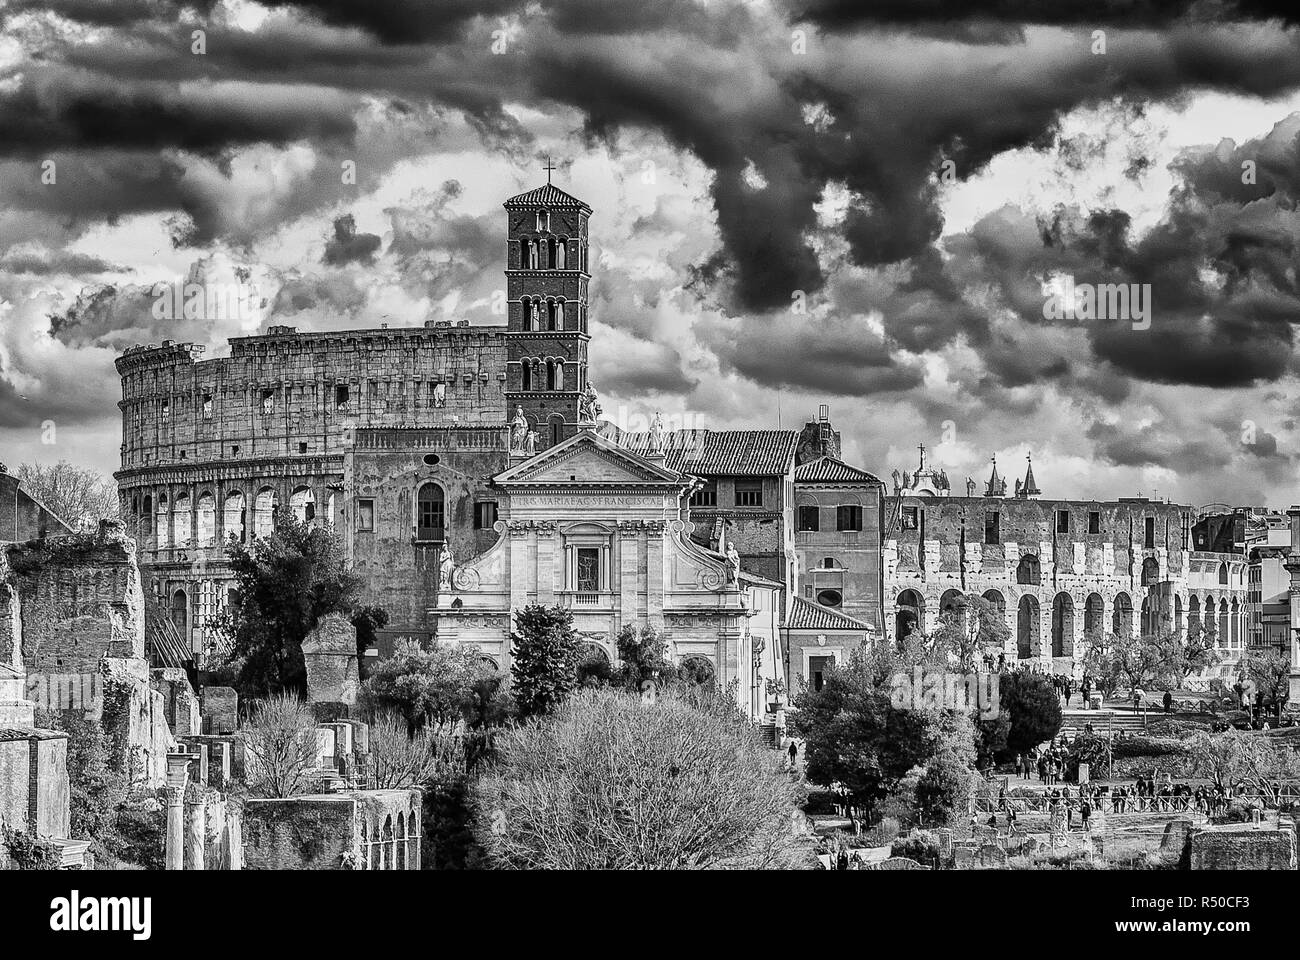 Coliseum and Roman Forum monuments in black and white engraving or etching style Stock Photo